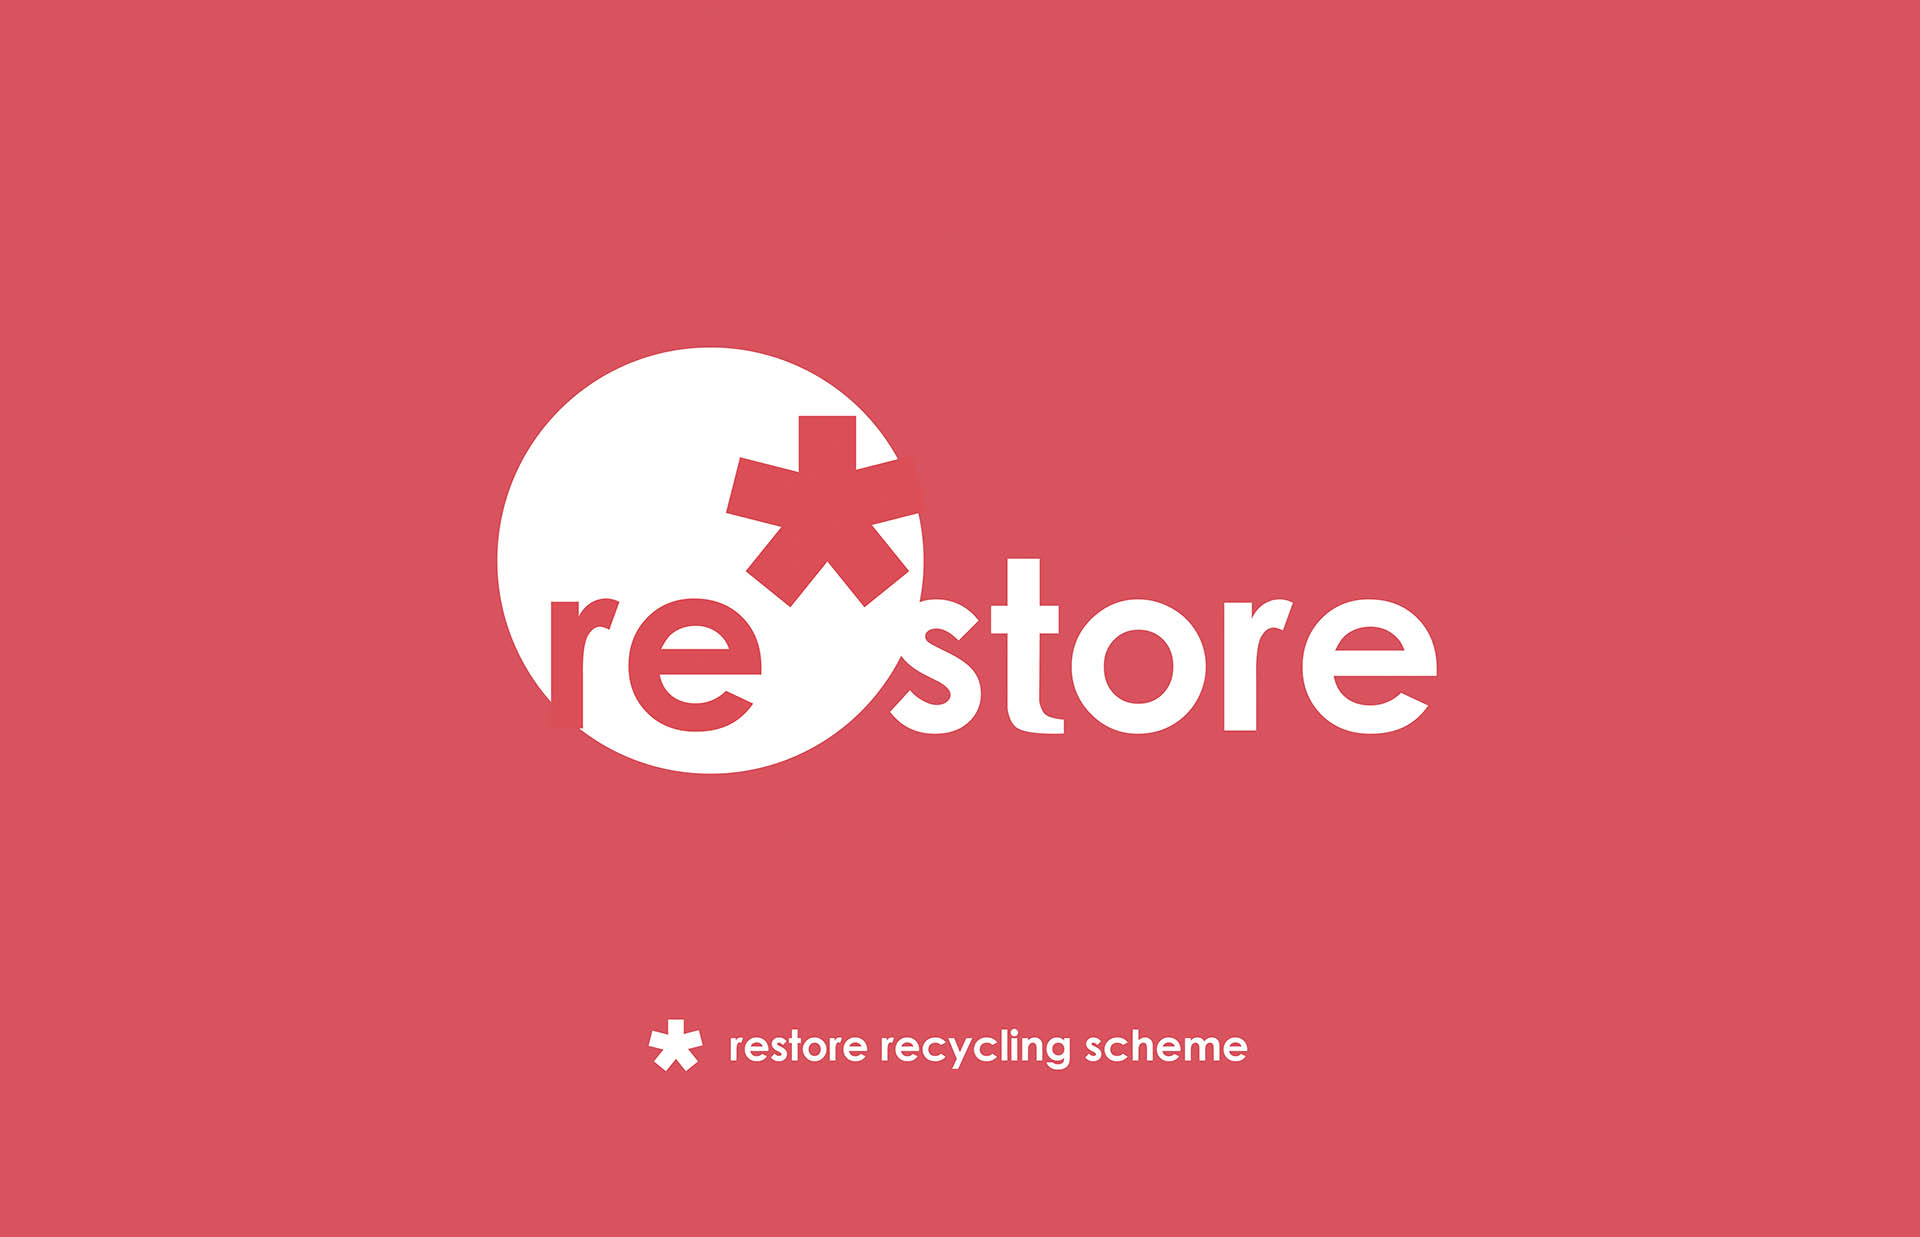 Restore is an environmental friendly store that provides products which can be easily recycled and reused